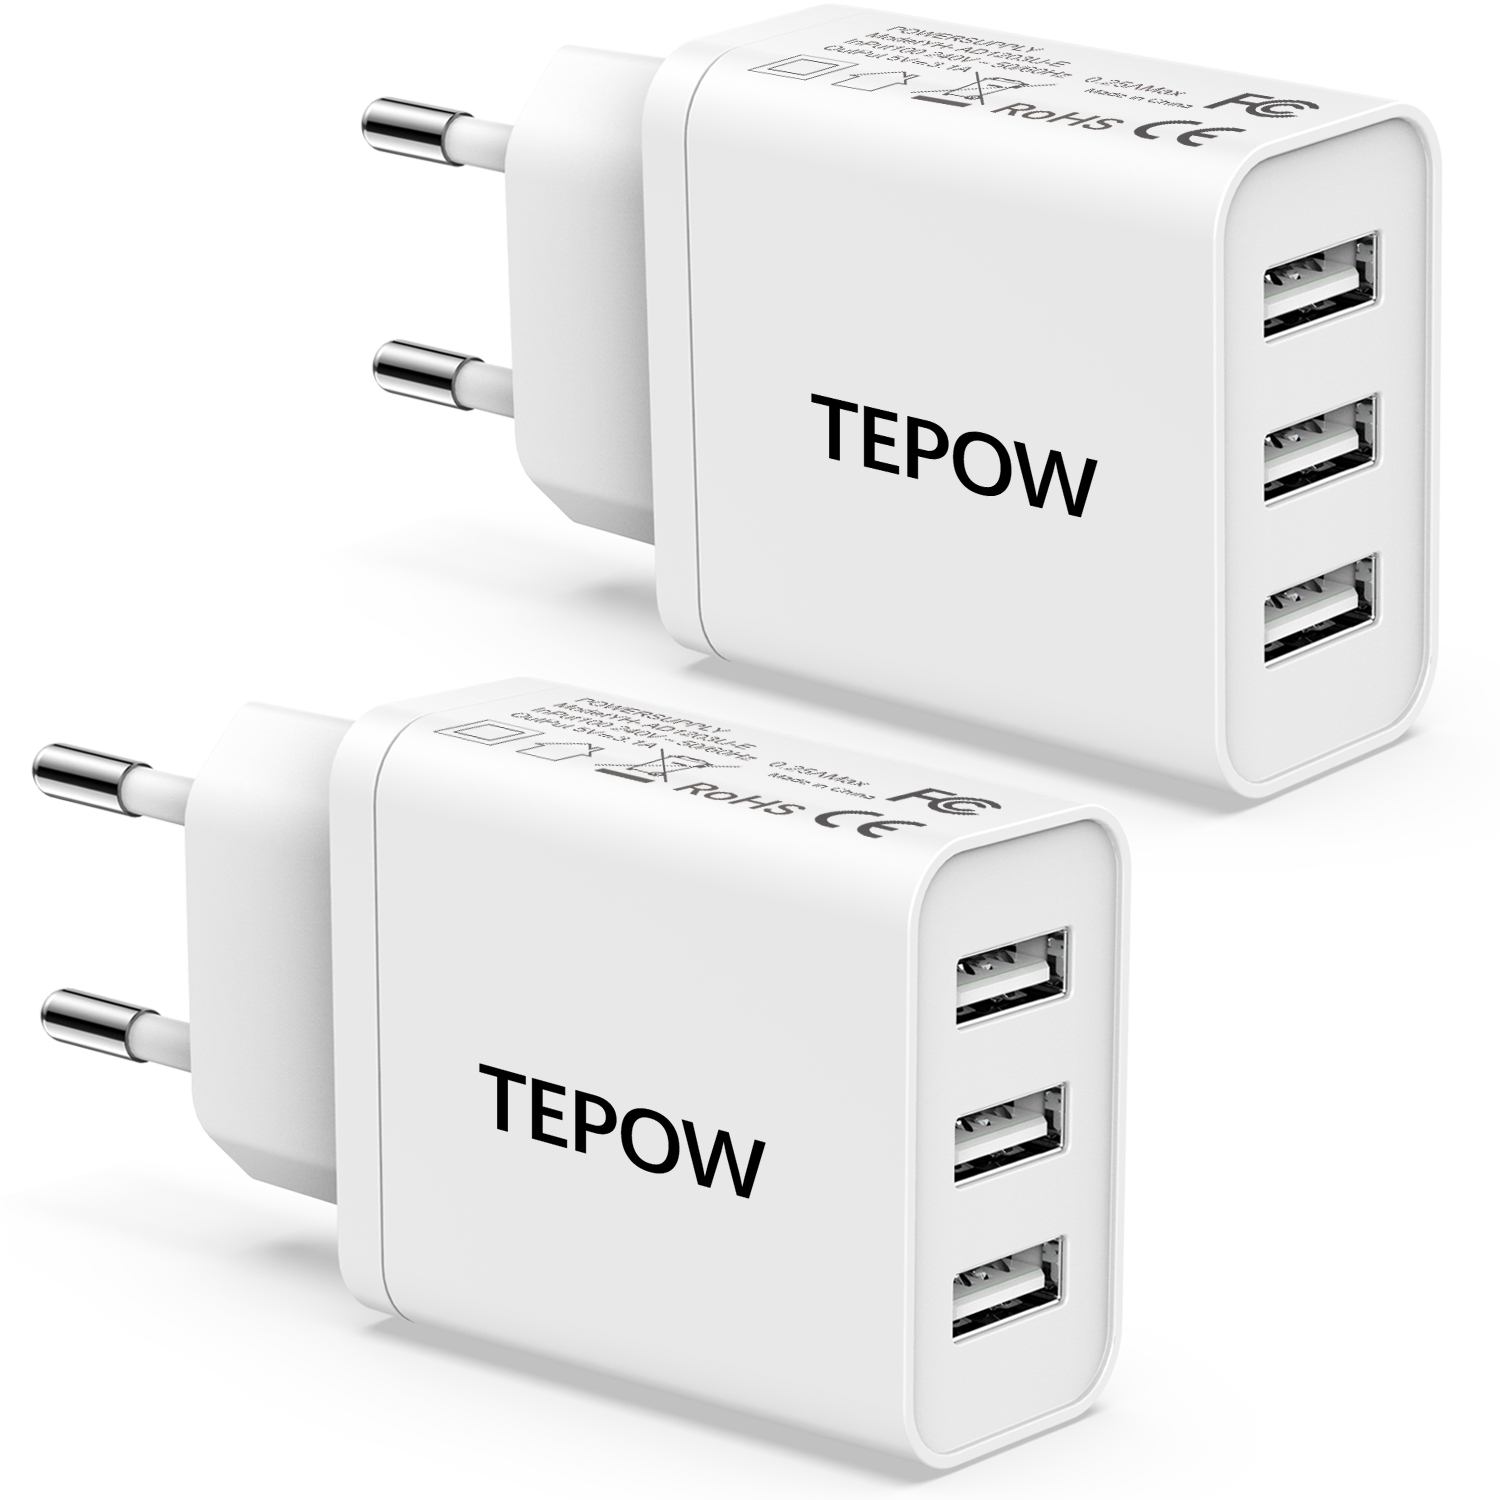 Products - tepow